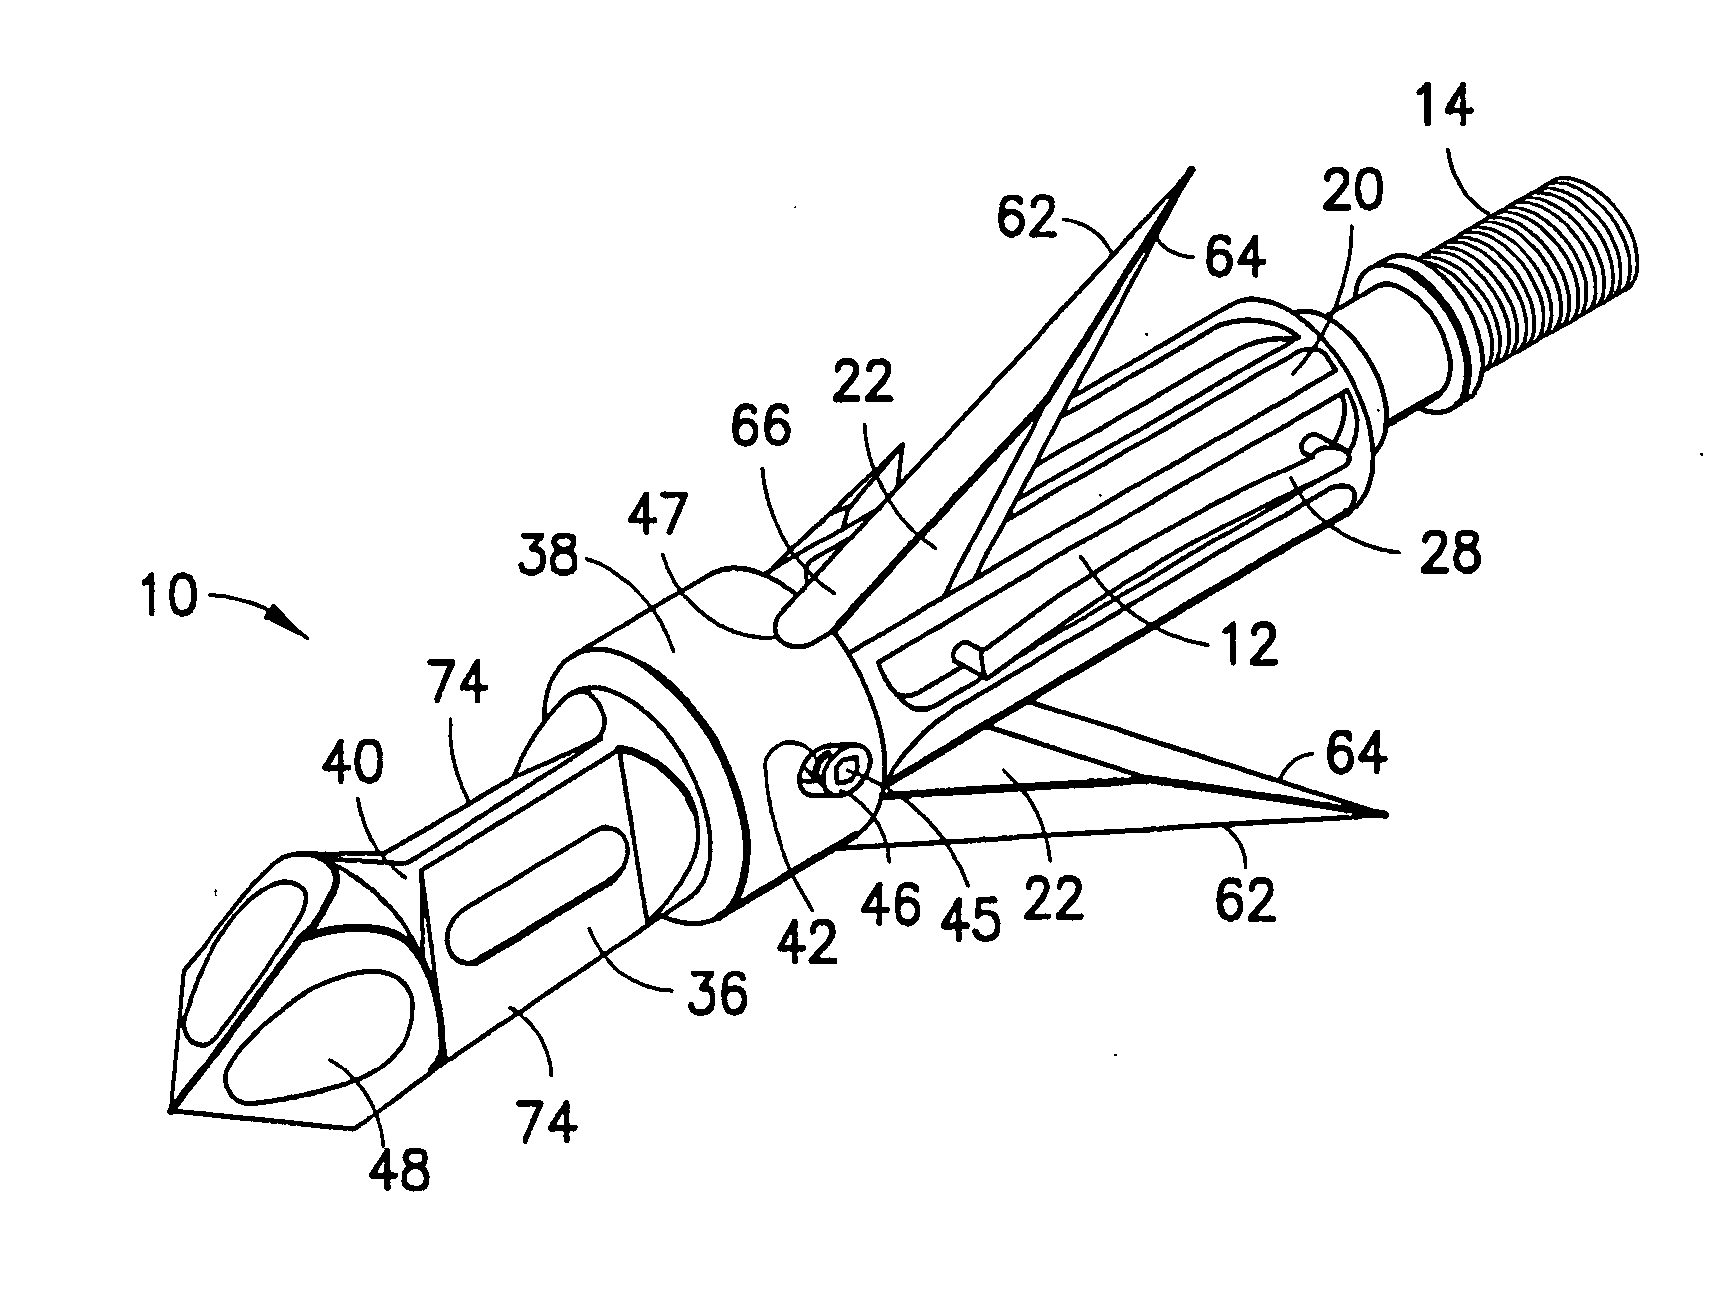 Mechanical broadhead with expandable blades